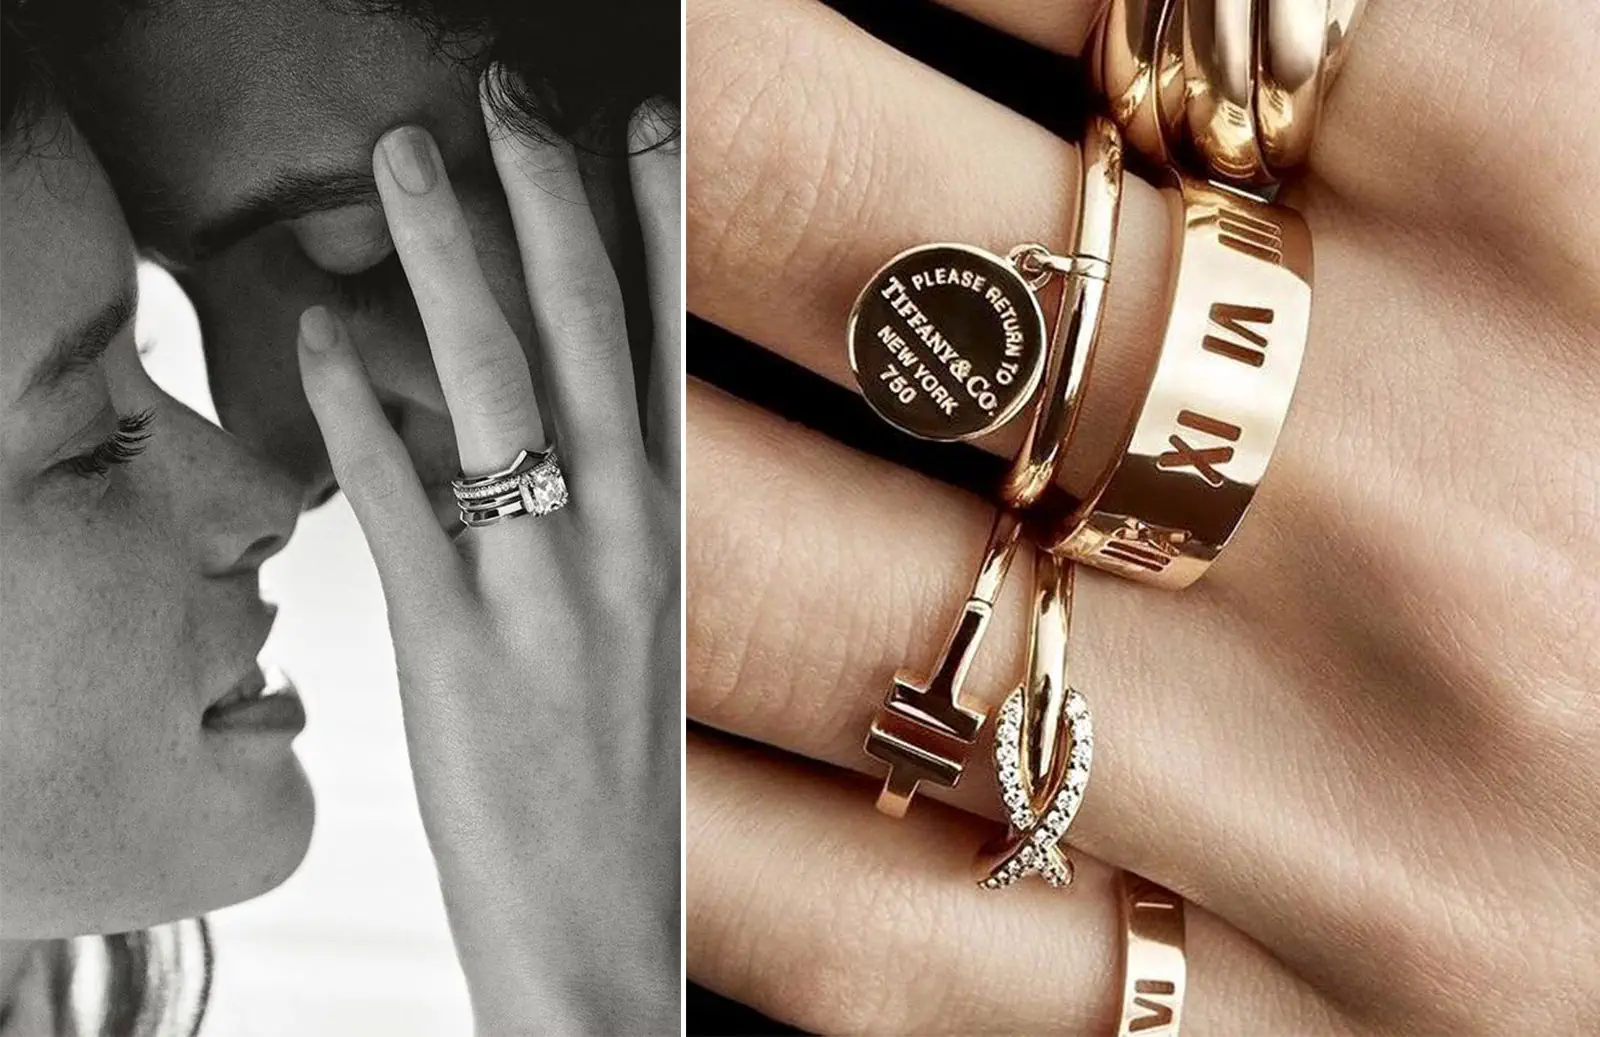 World’s top engagement and wedding ring brands